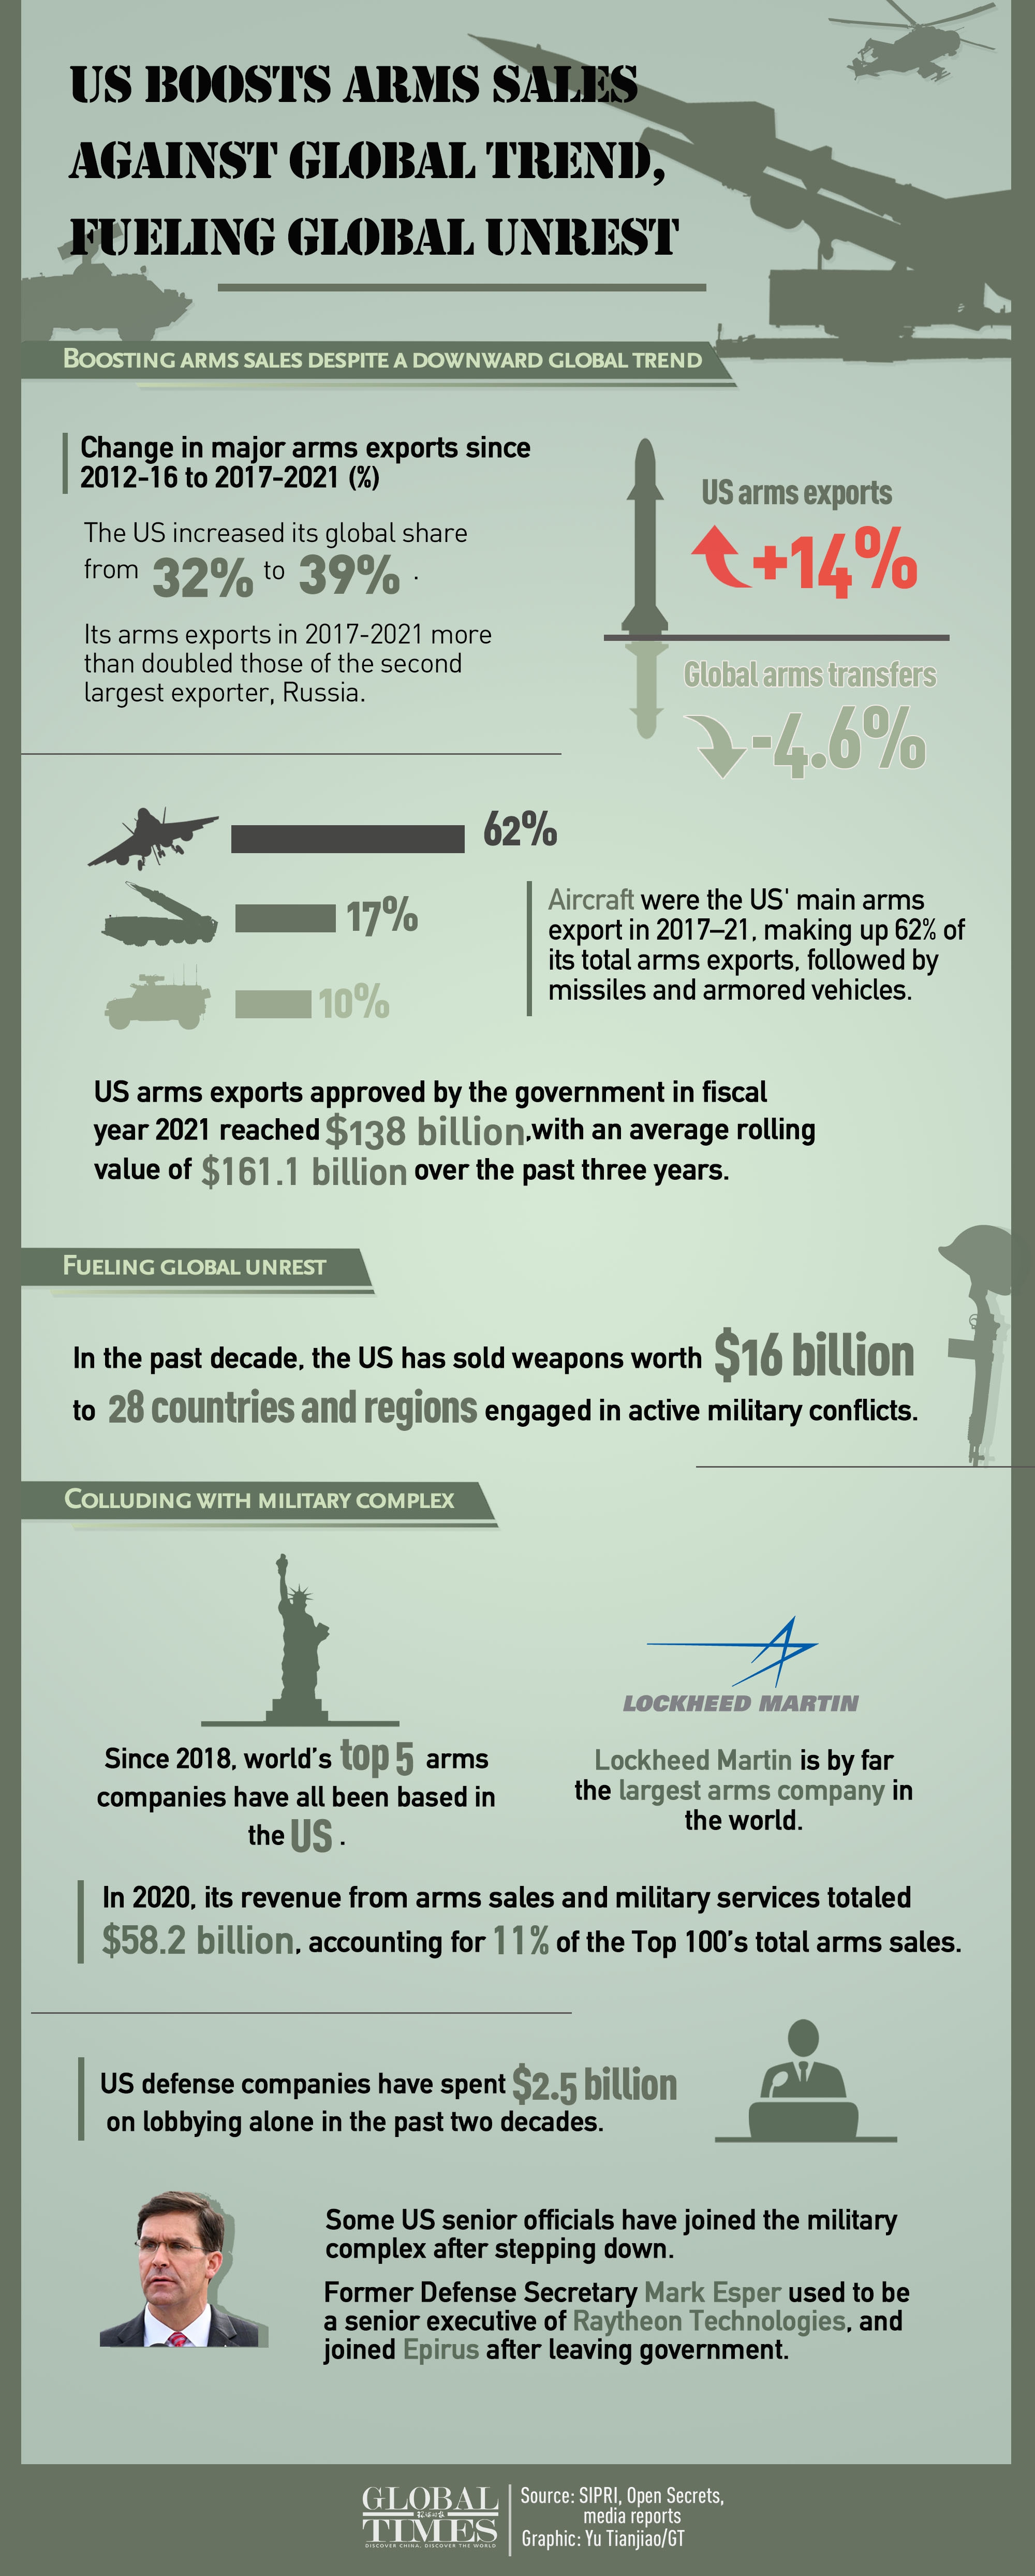 While global arms trade is in a downward trend, what has the US been doing? 
- Greatly increasing its arms exports in the past 5 years
- Selling weapons around to fuel global unrest
- US arms firms and politicians taking advantage of wars to become rich.